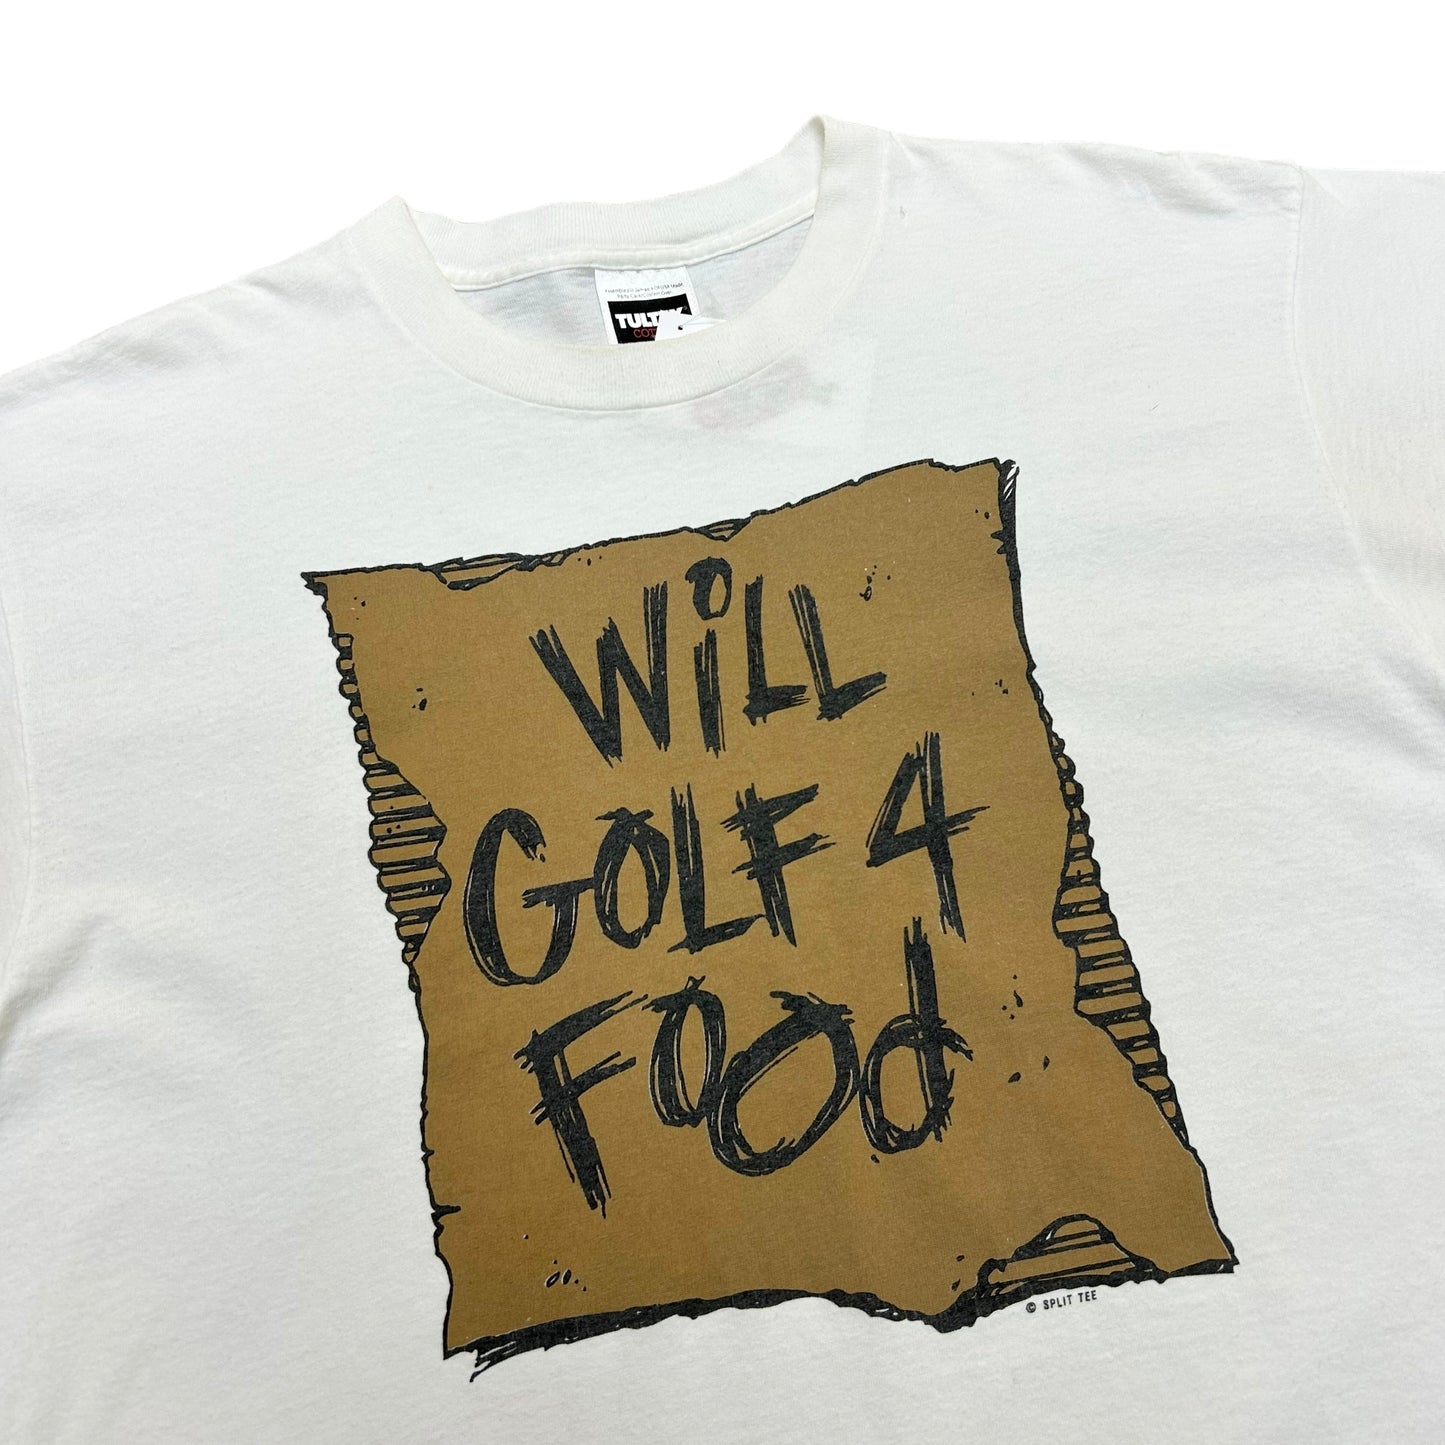 Vintage 1990s “Will Golf 4 Food” White Graphic T-Shirt - Size XL